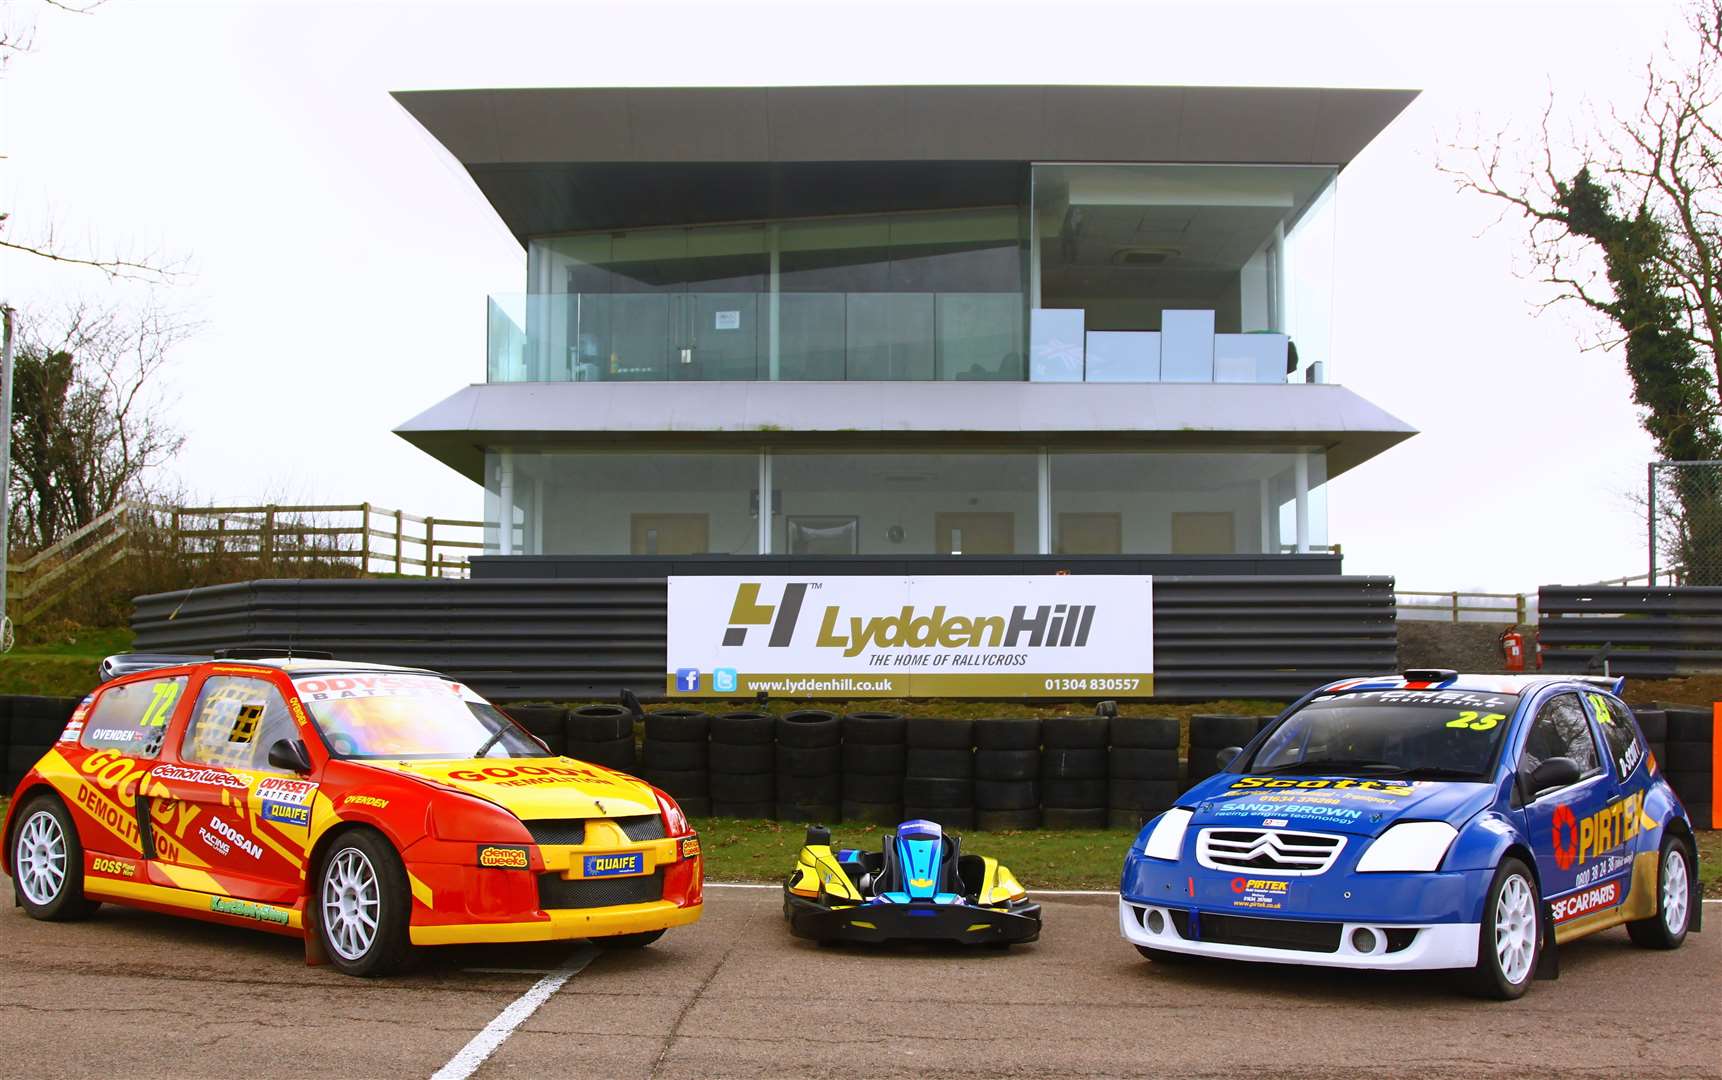 Race circuits Lydden Hill and Buckmore Park have launched a commercial partnership for the 2017 season